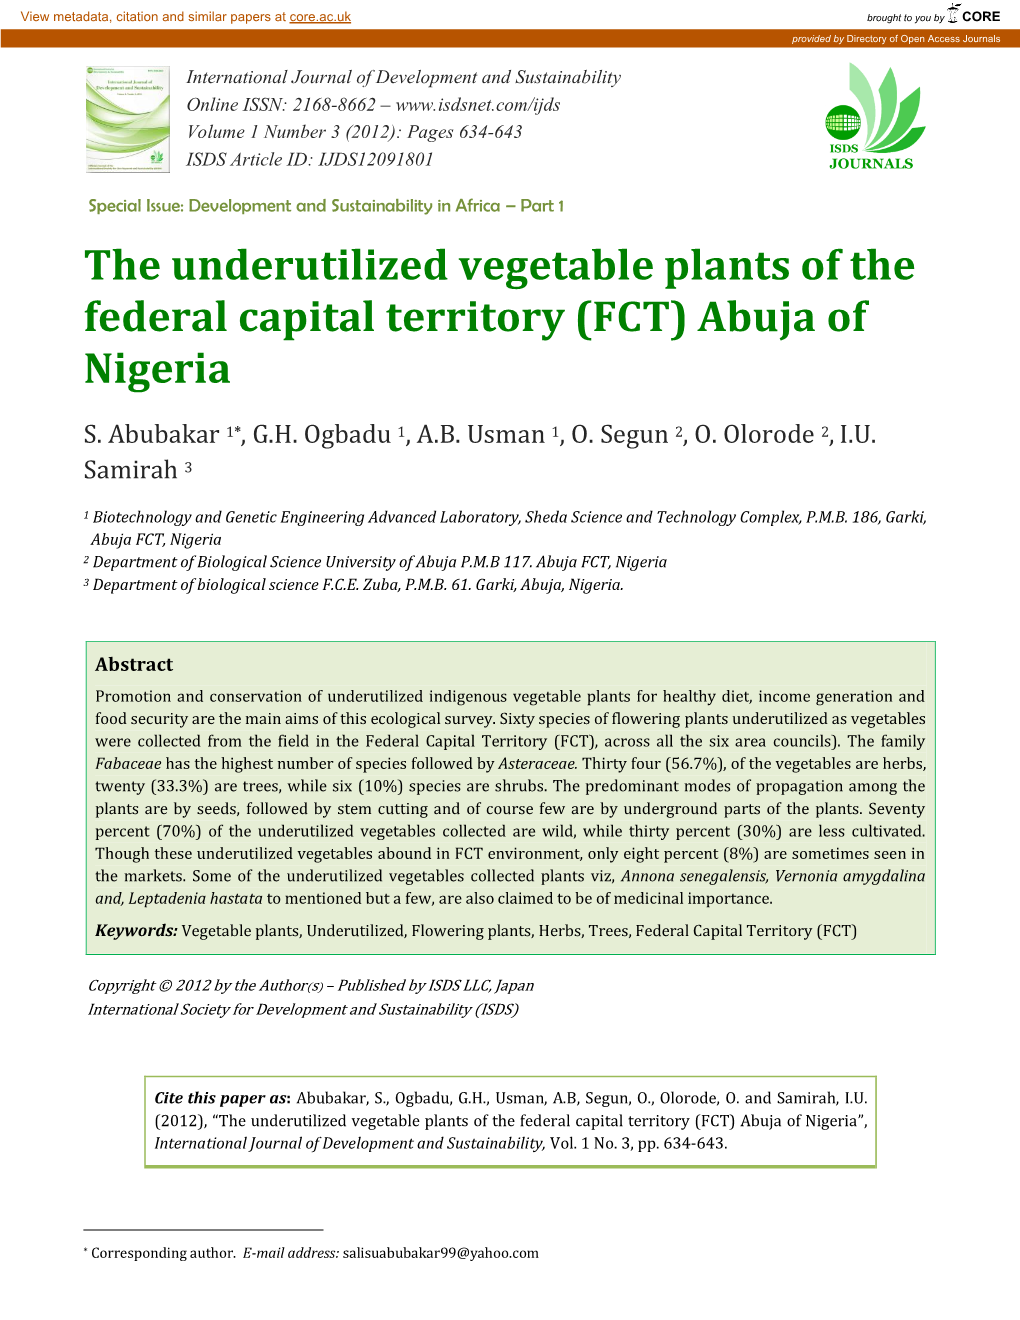 The Underutilized Vegetable Plants of the Federal Capital Territory (FCT) Abuja of Nigeria